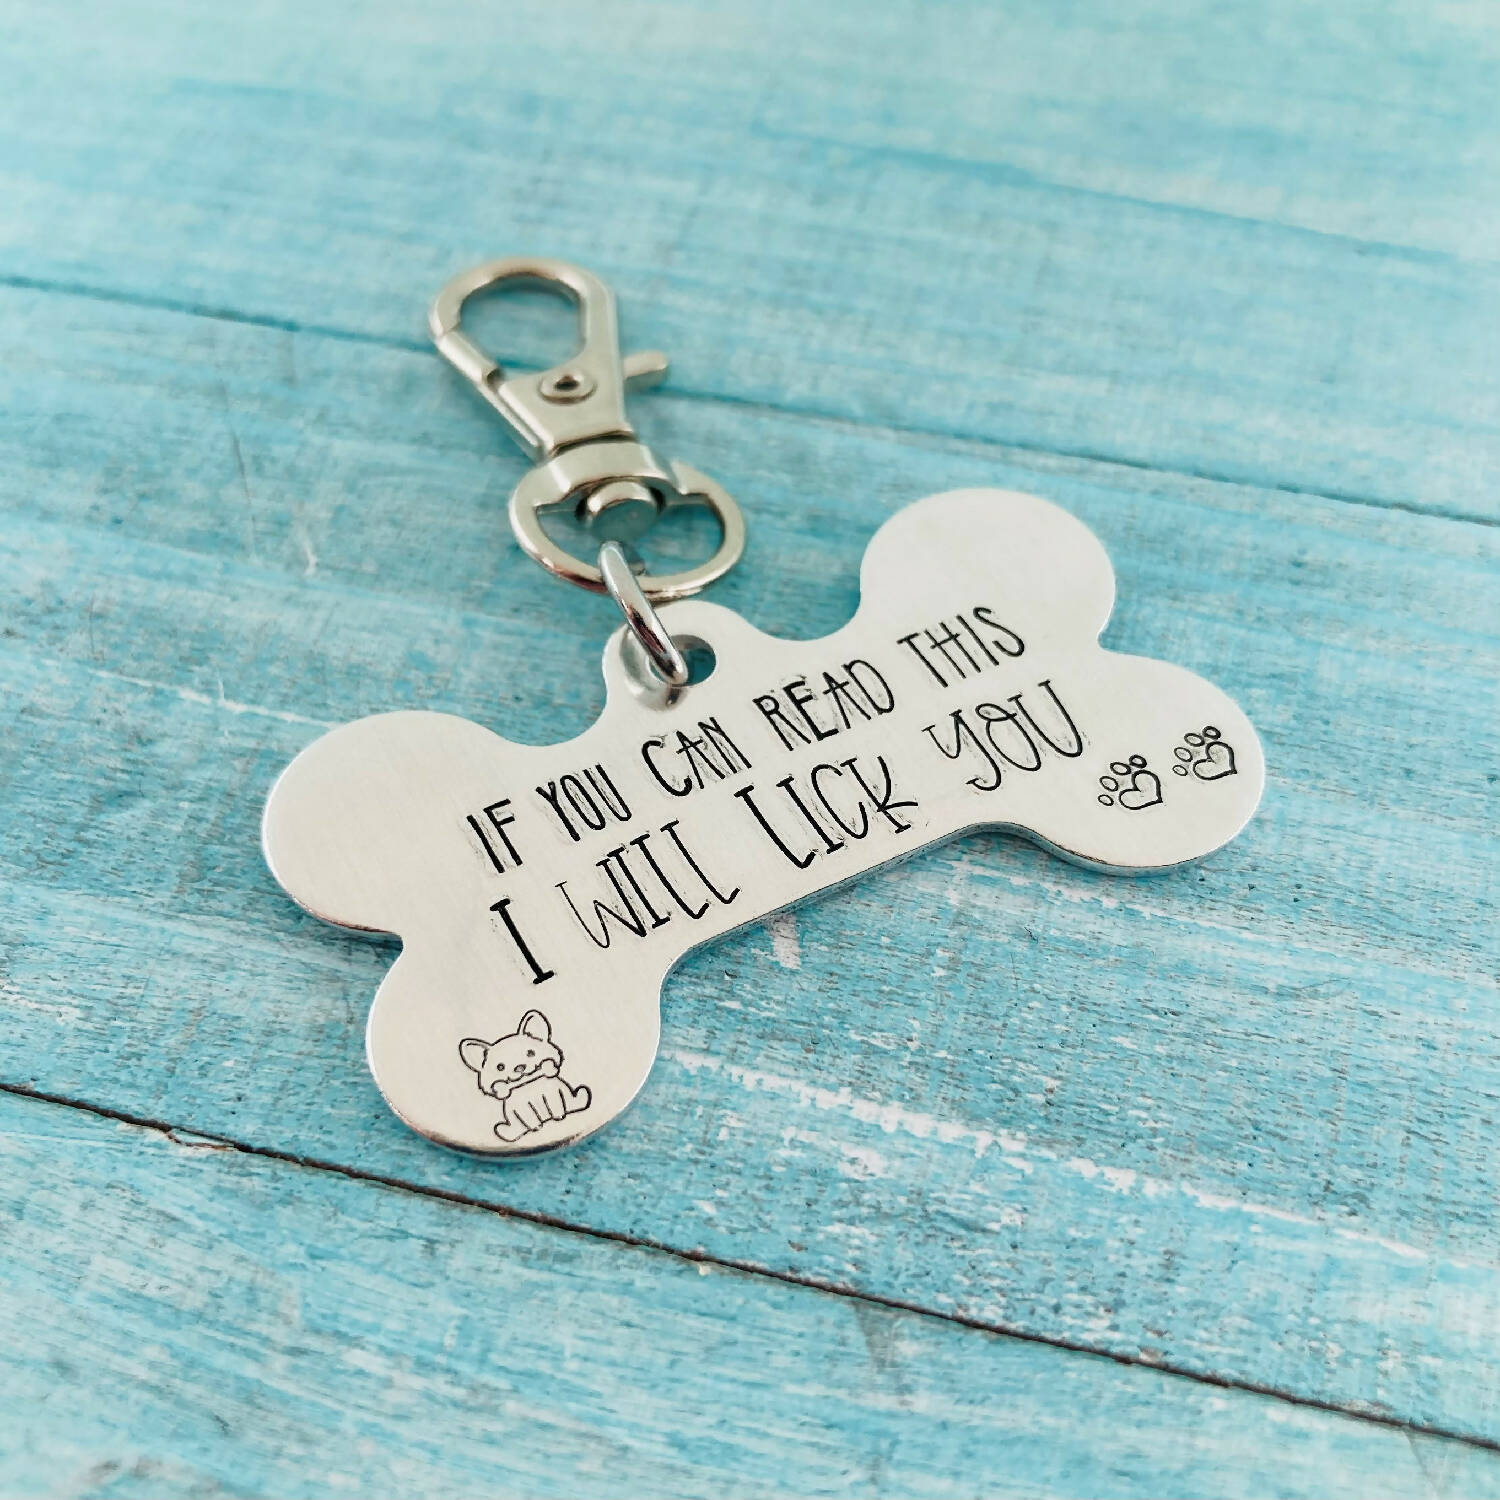 Pet Tag - If you can read this I will lick you